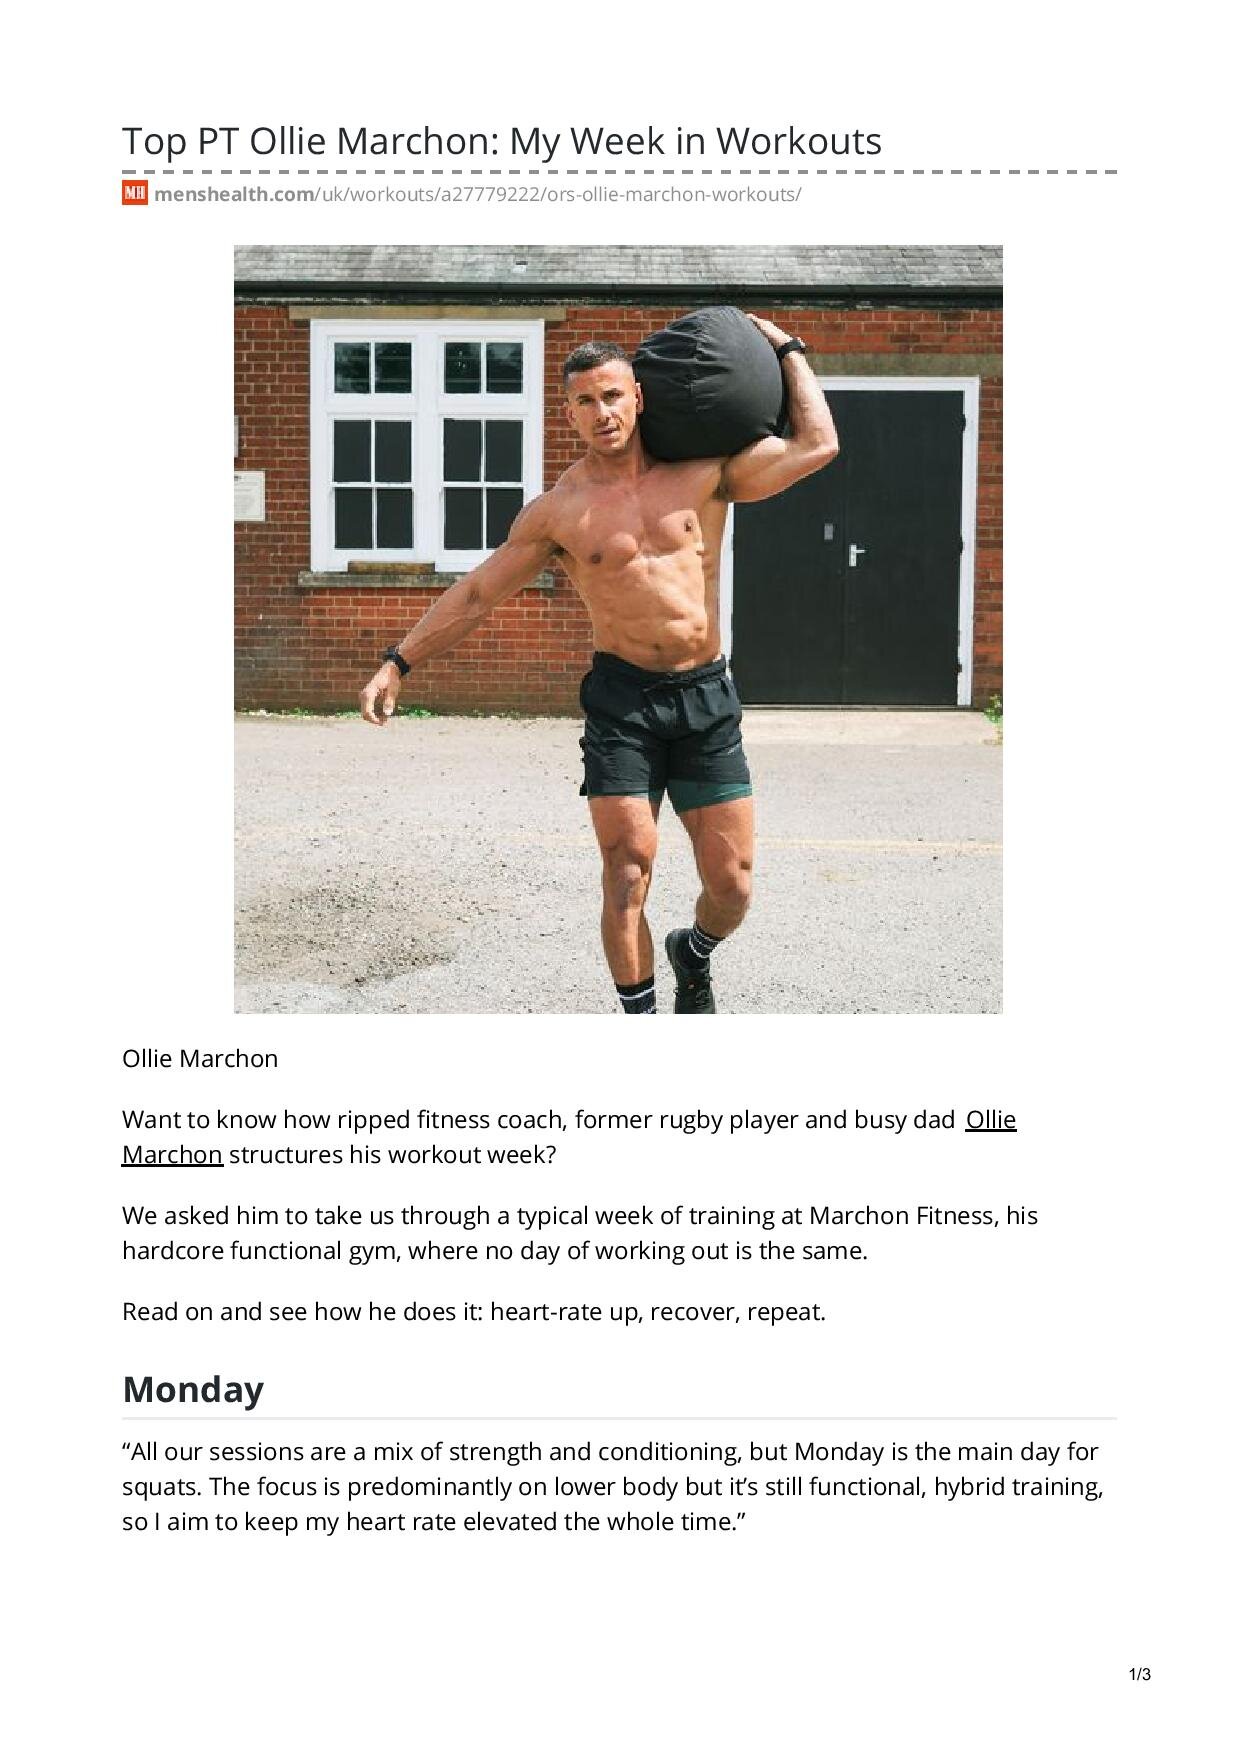 menshealth.com-Top PT Ollie Marchon My Week in Workouts-page-001.jpg